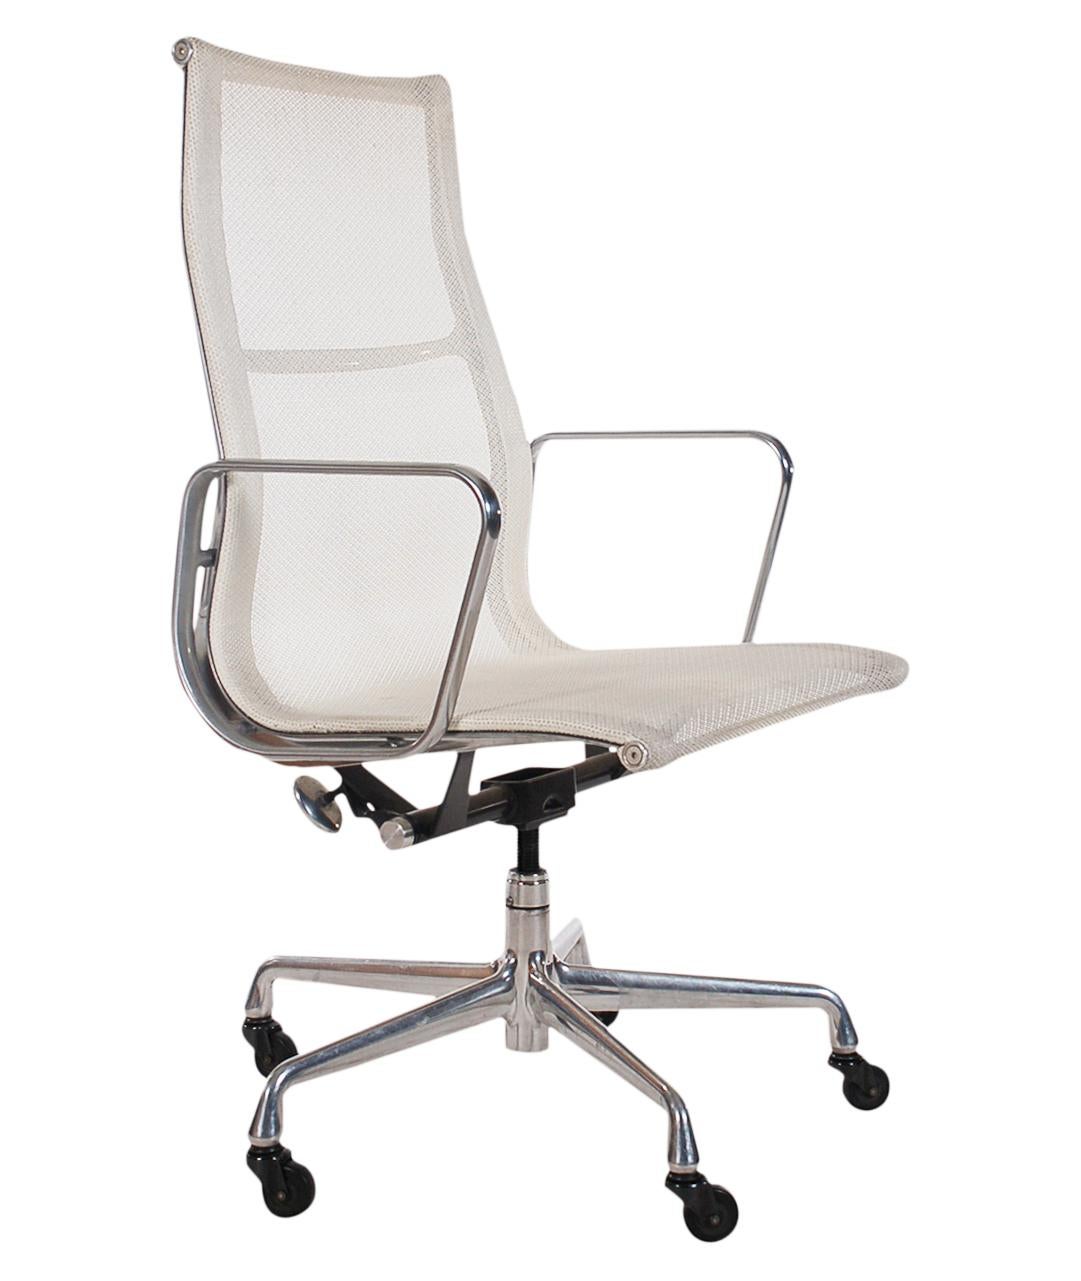 Mid-Century Modern Set of Four Charles Eames for Herman Miller White Conference Room Office Chairs